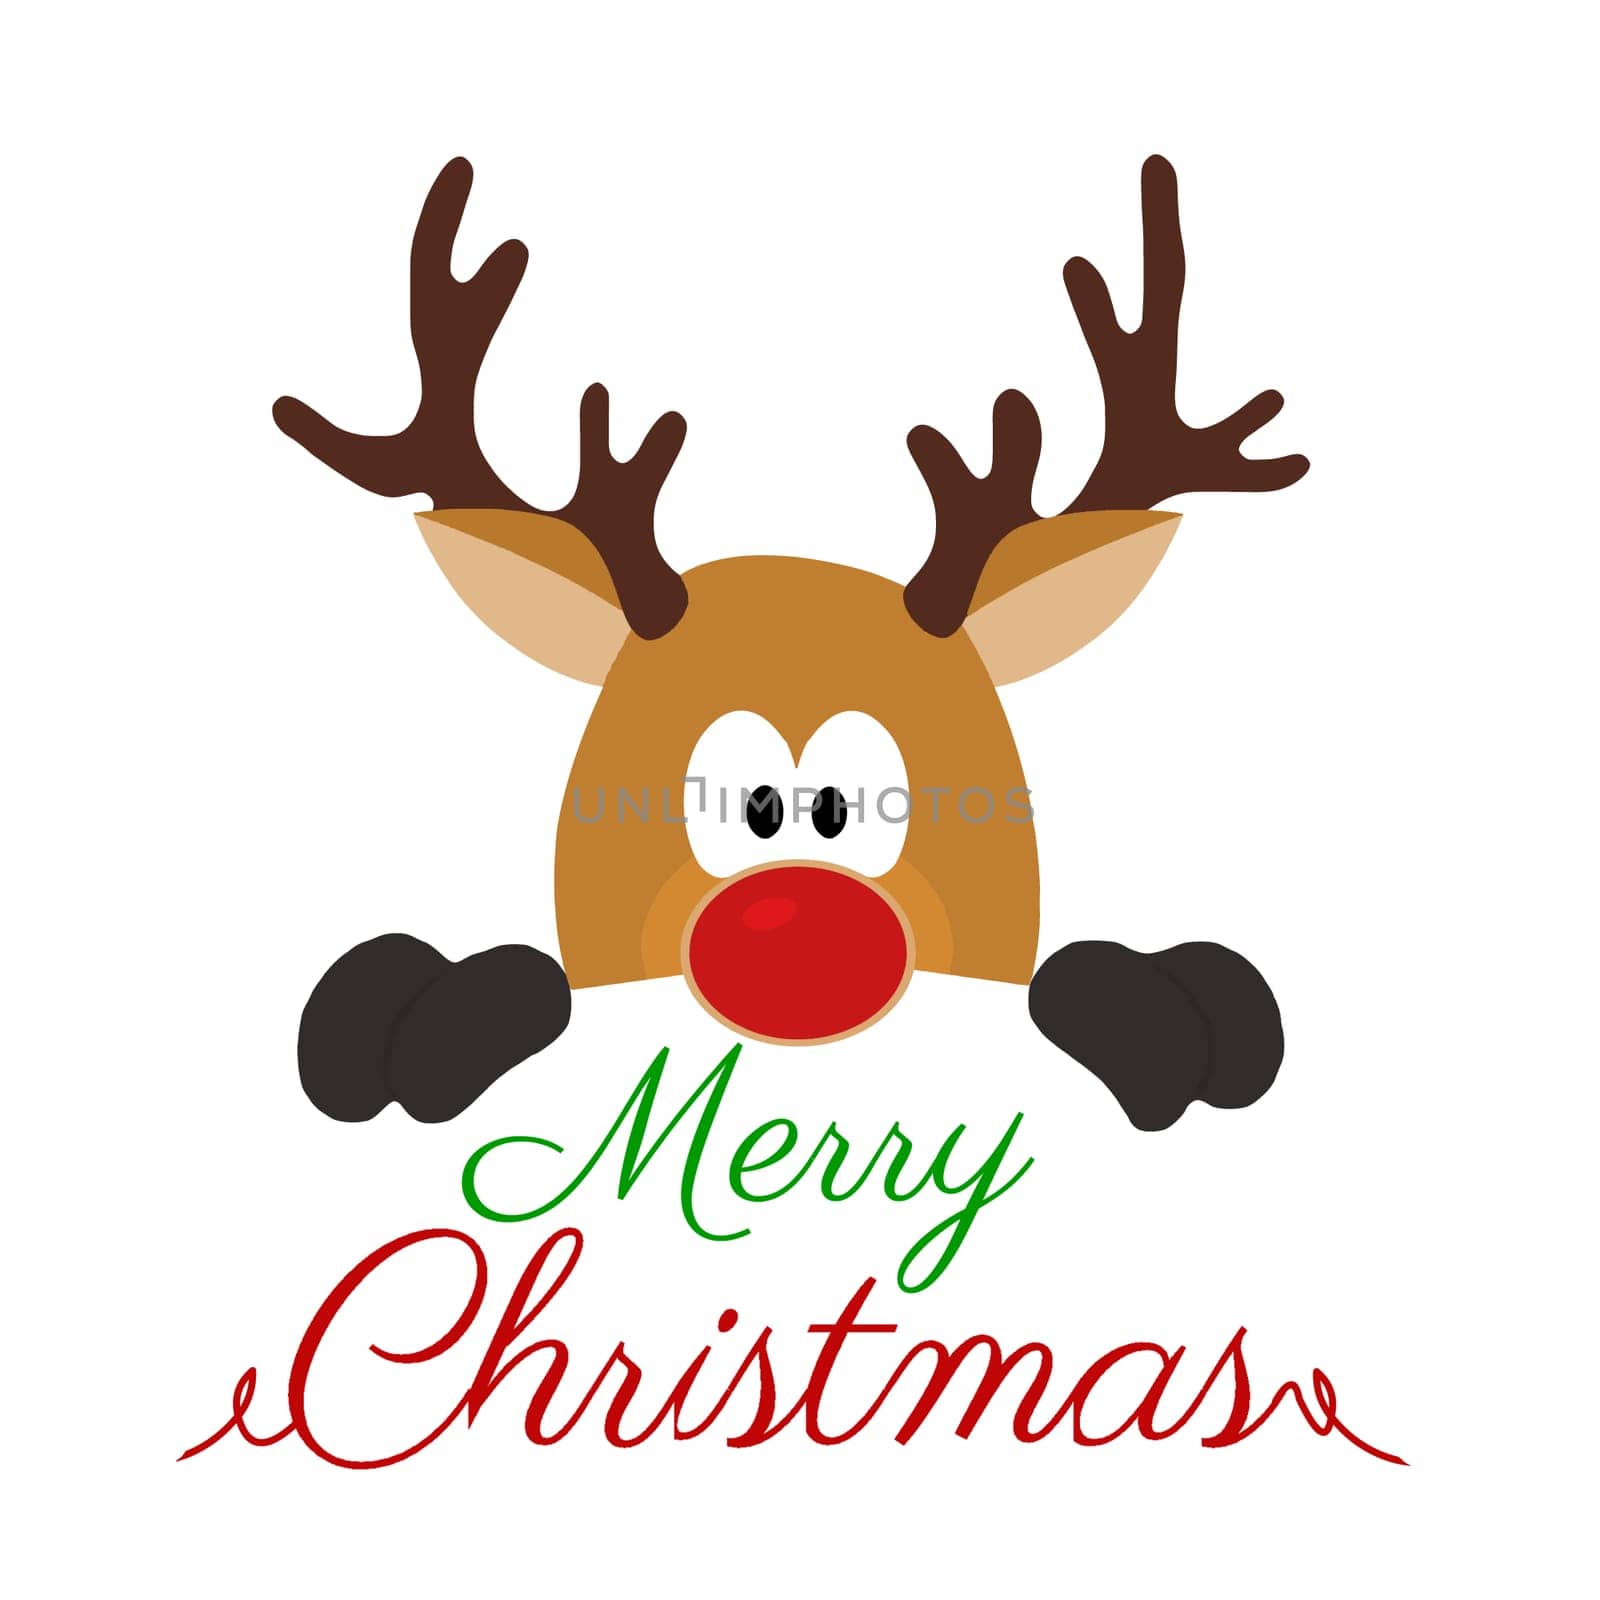 A reindeer popping his head over with the message "Merry Christmas".